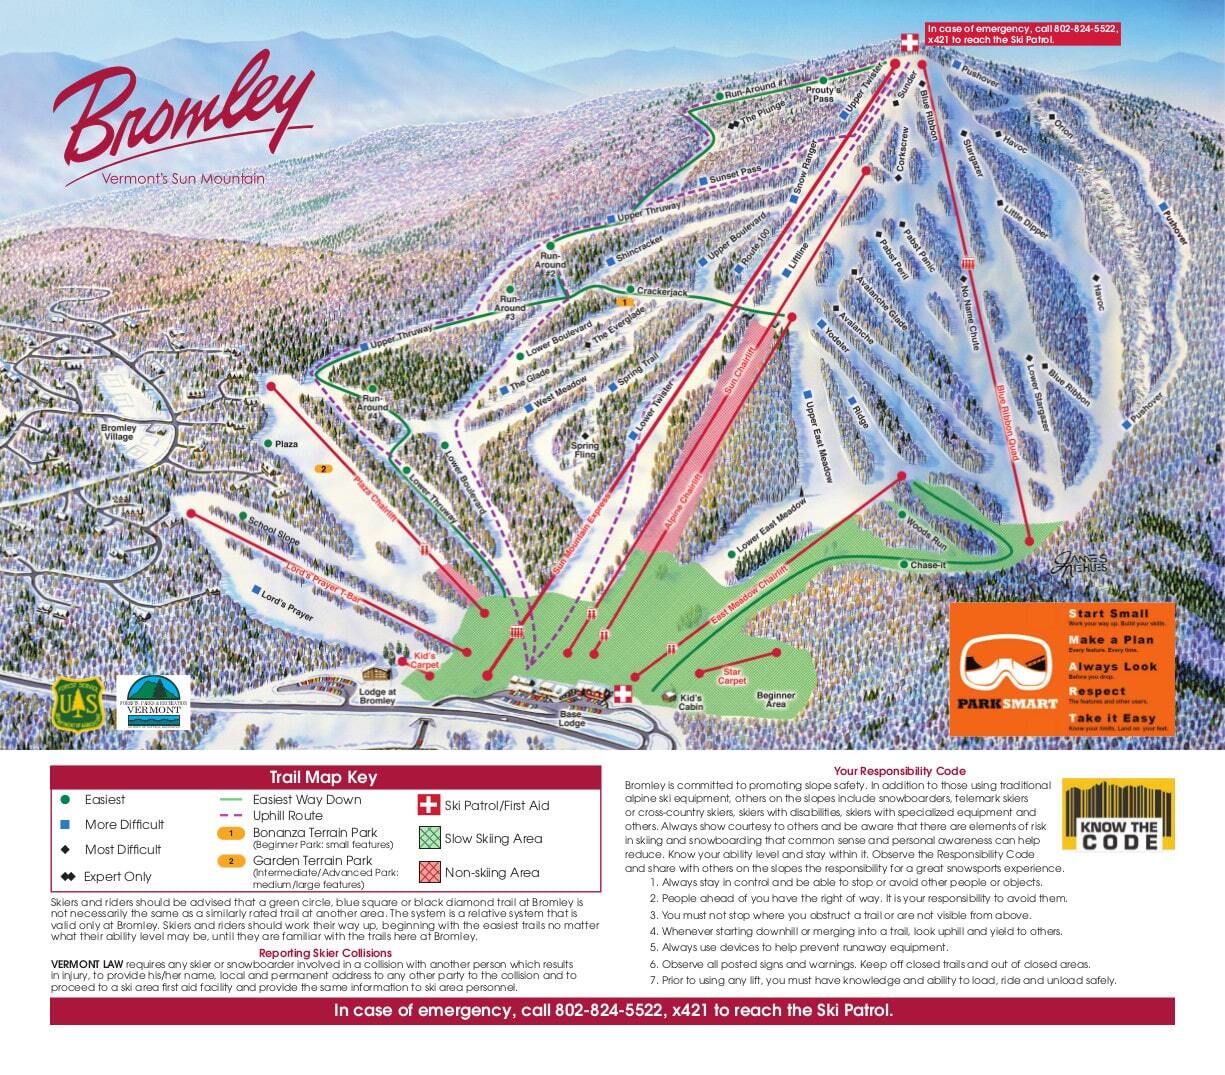 Bromley mountain hiking trail map